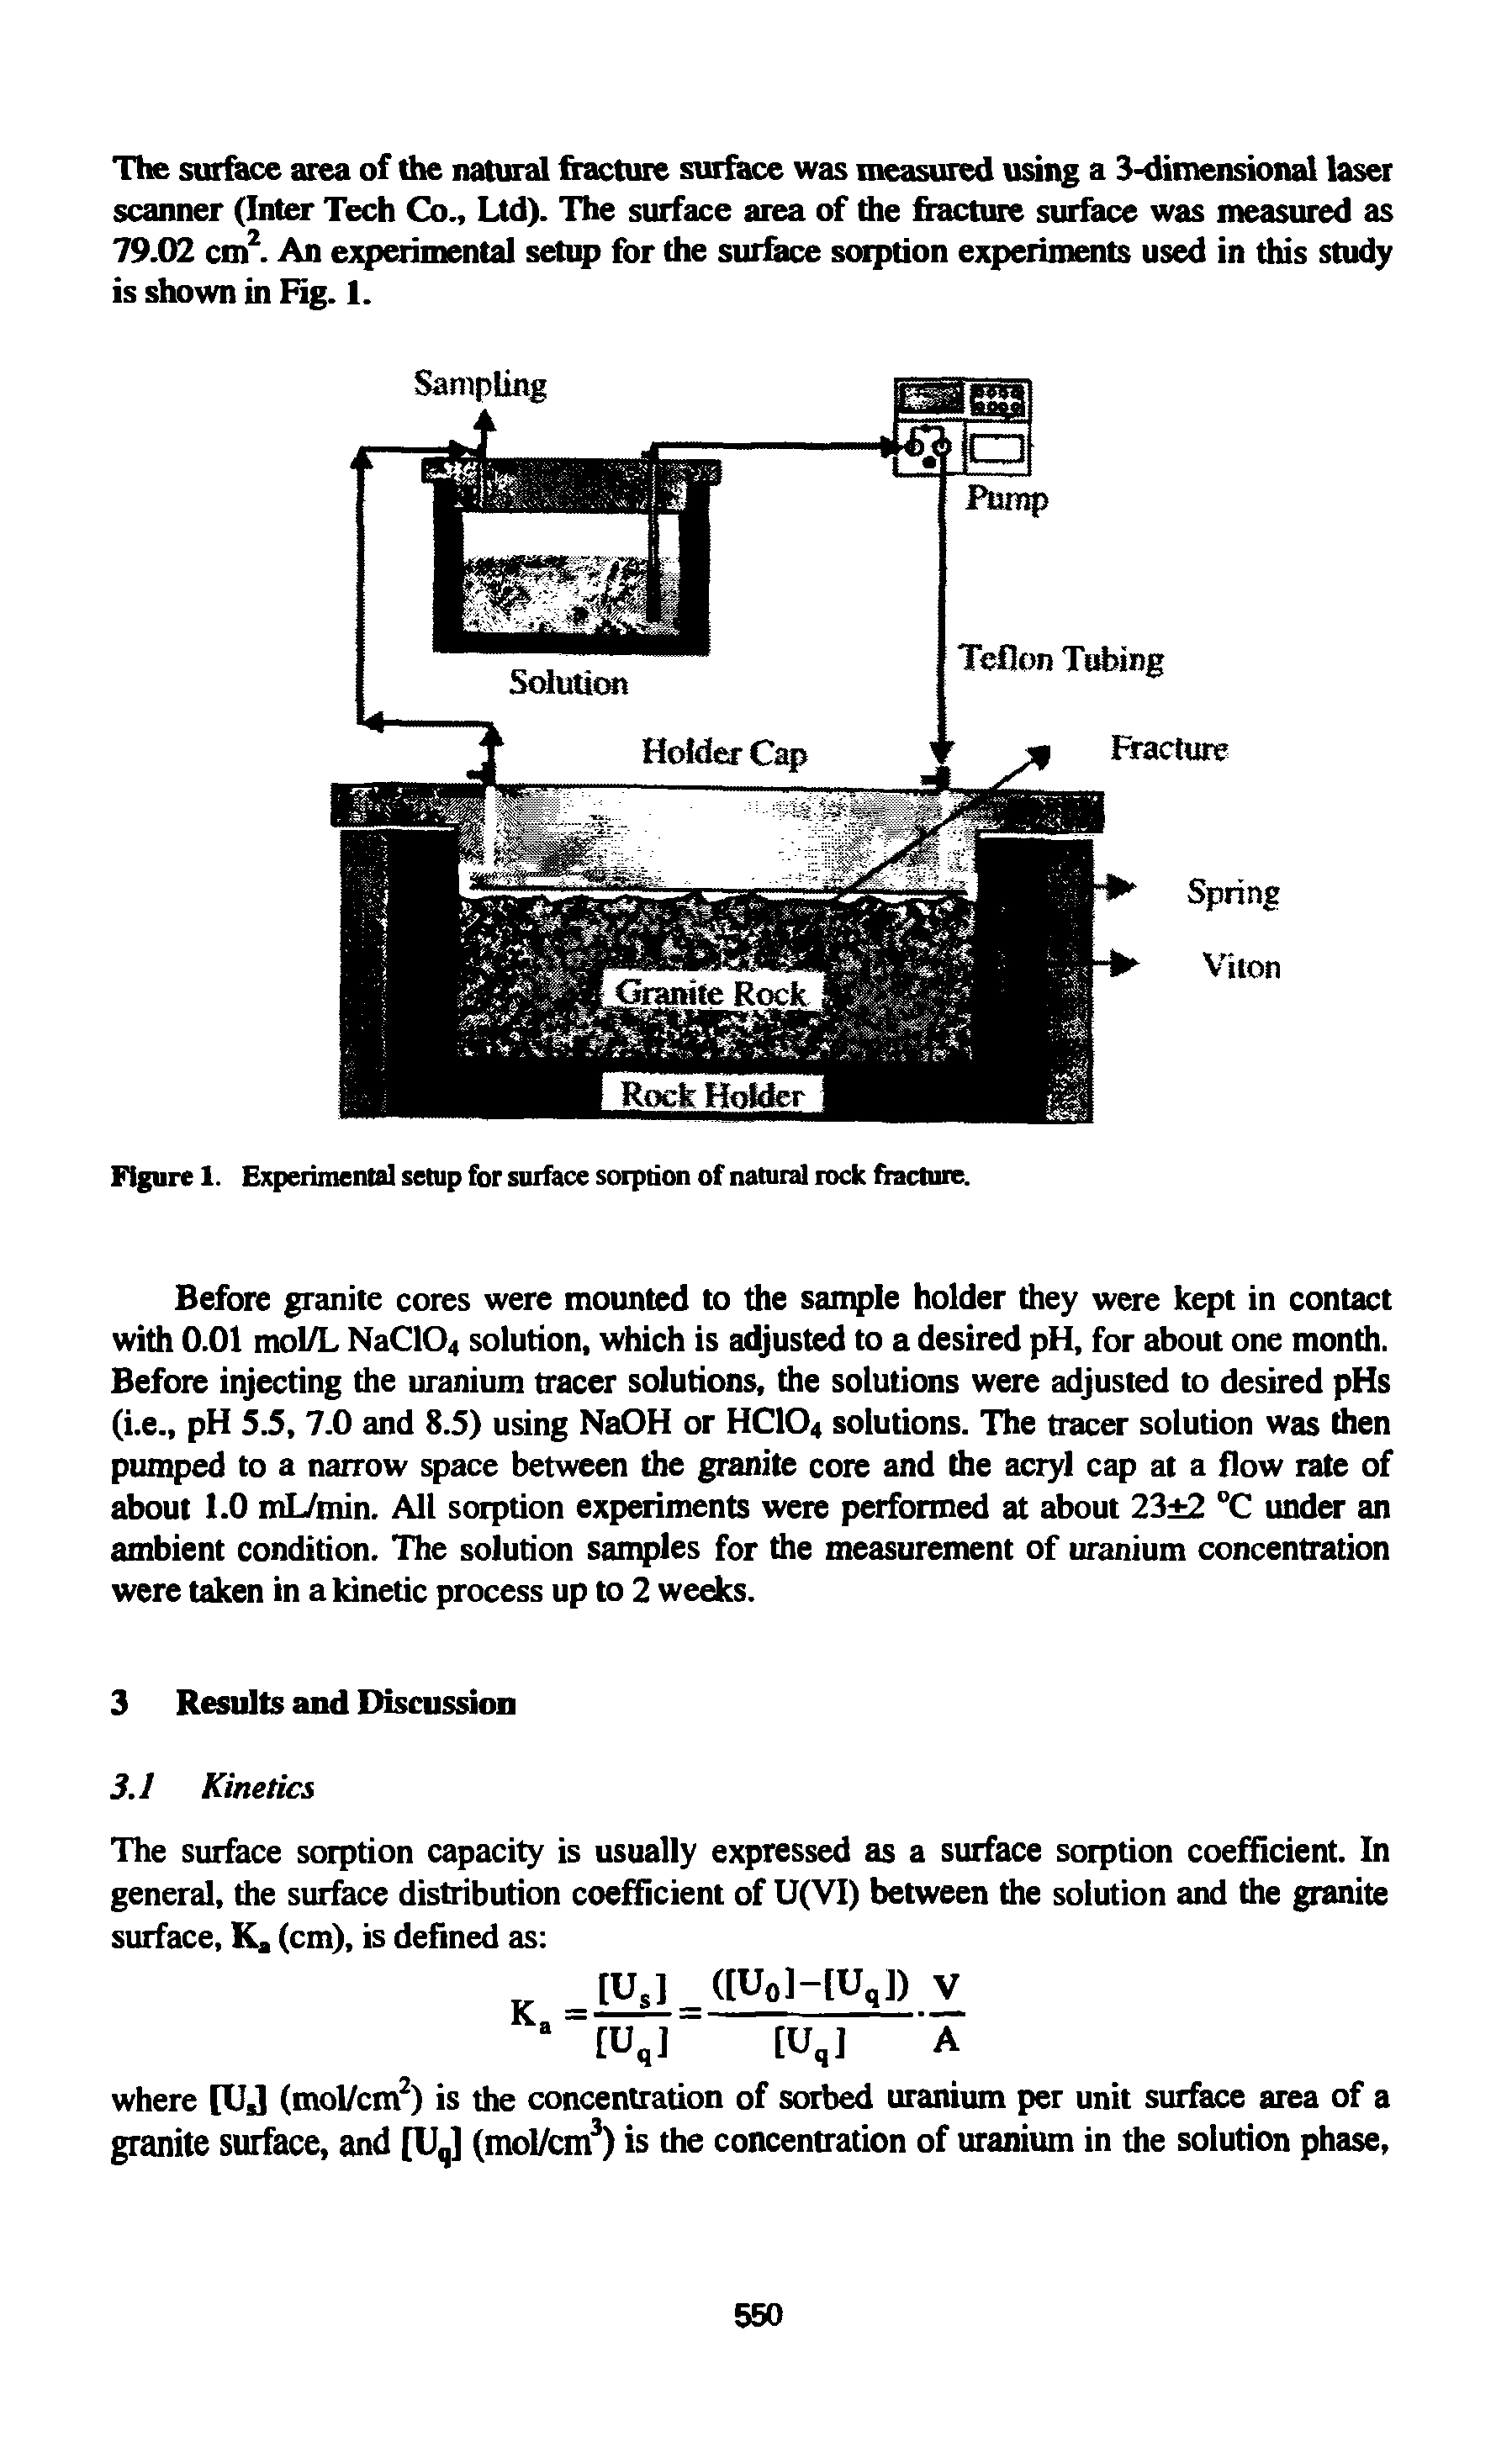 Figure 1. Experimental setup for surface sorption of natural rock fracture.